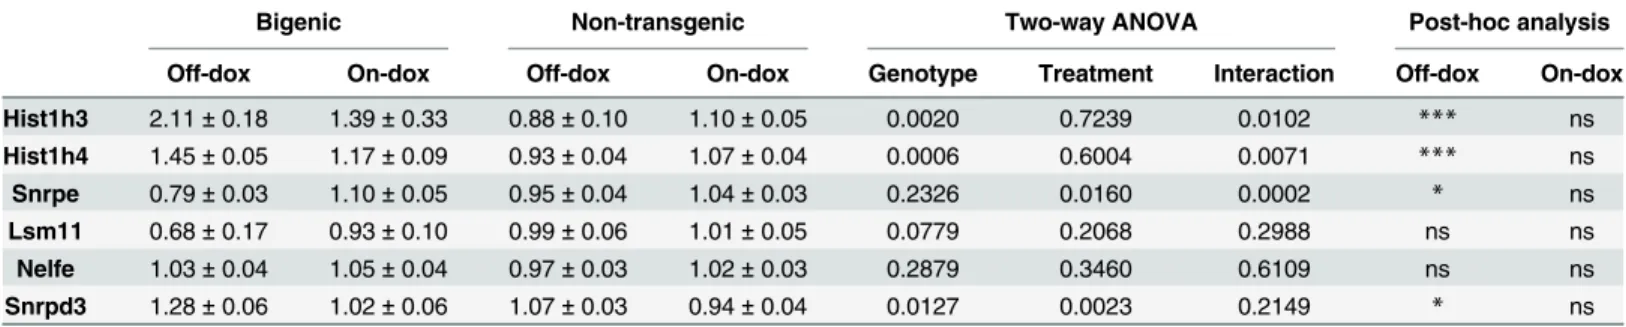 Table 2. qPCR validation results for control validation groups. Off-dox refers to mice fed a doxycycline-containing diet until 28 days of age followed by 10 days off doxycycline before sacrifice, while on-dox refers to mice fed a doxycycline-containing die